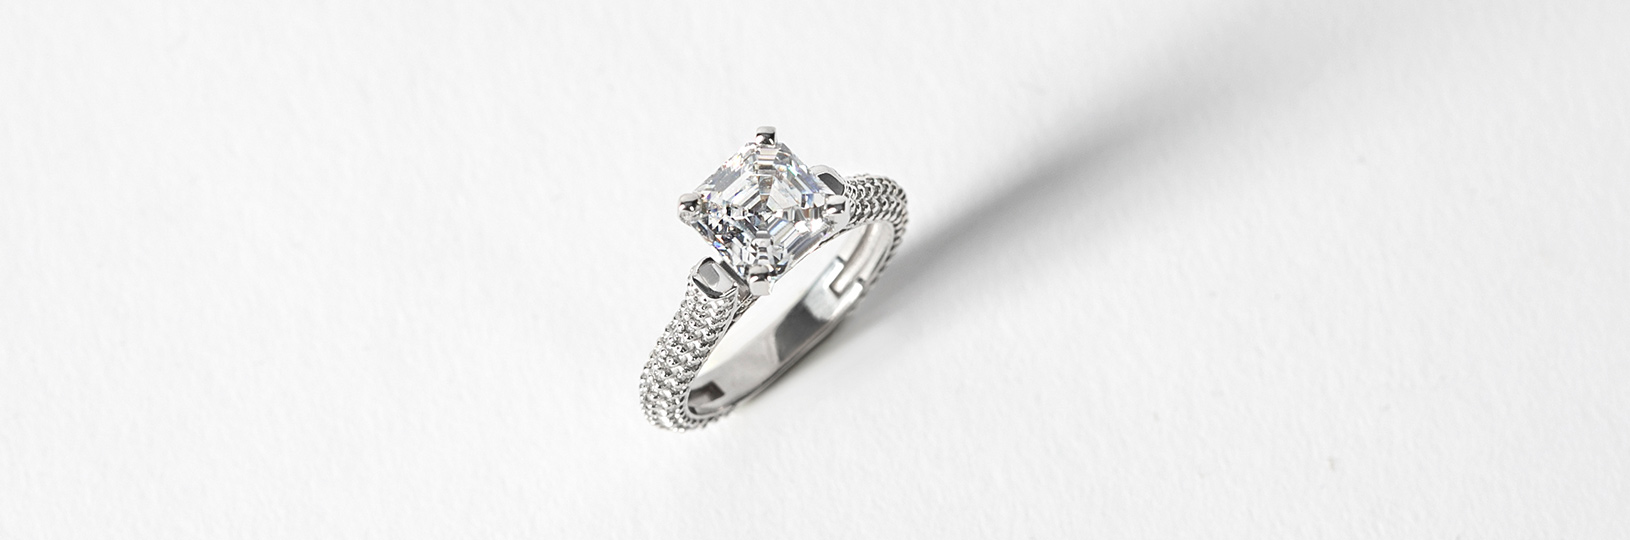 A sliver engagement ring in an accented setting